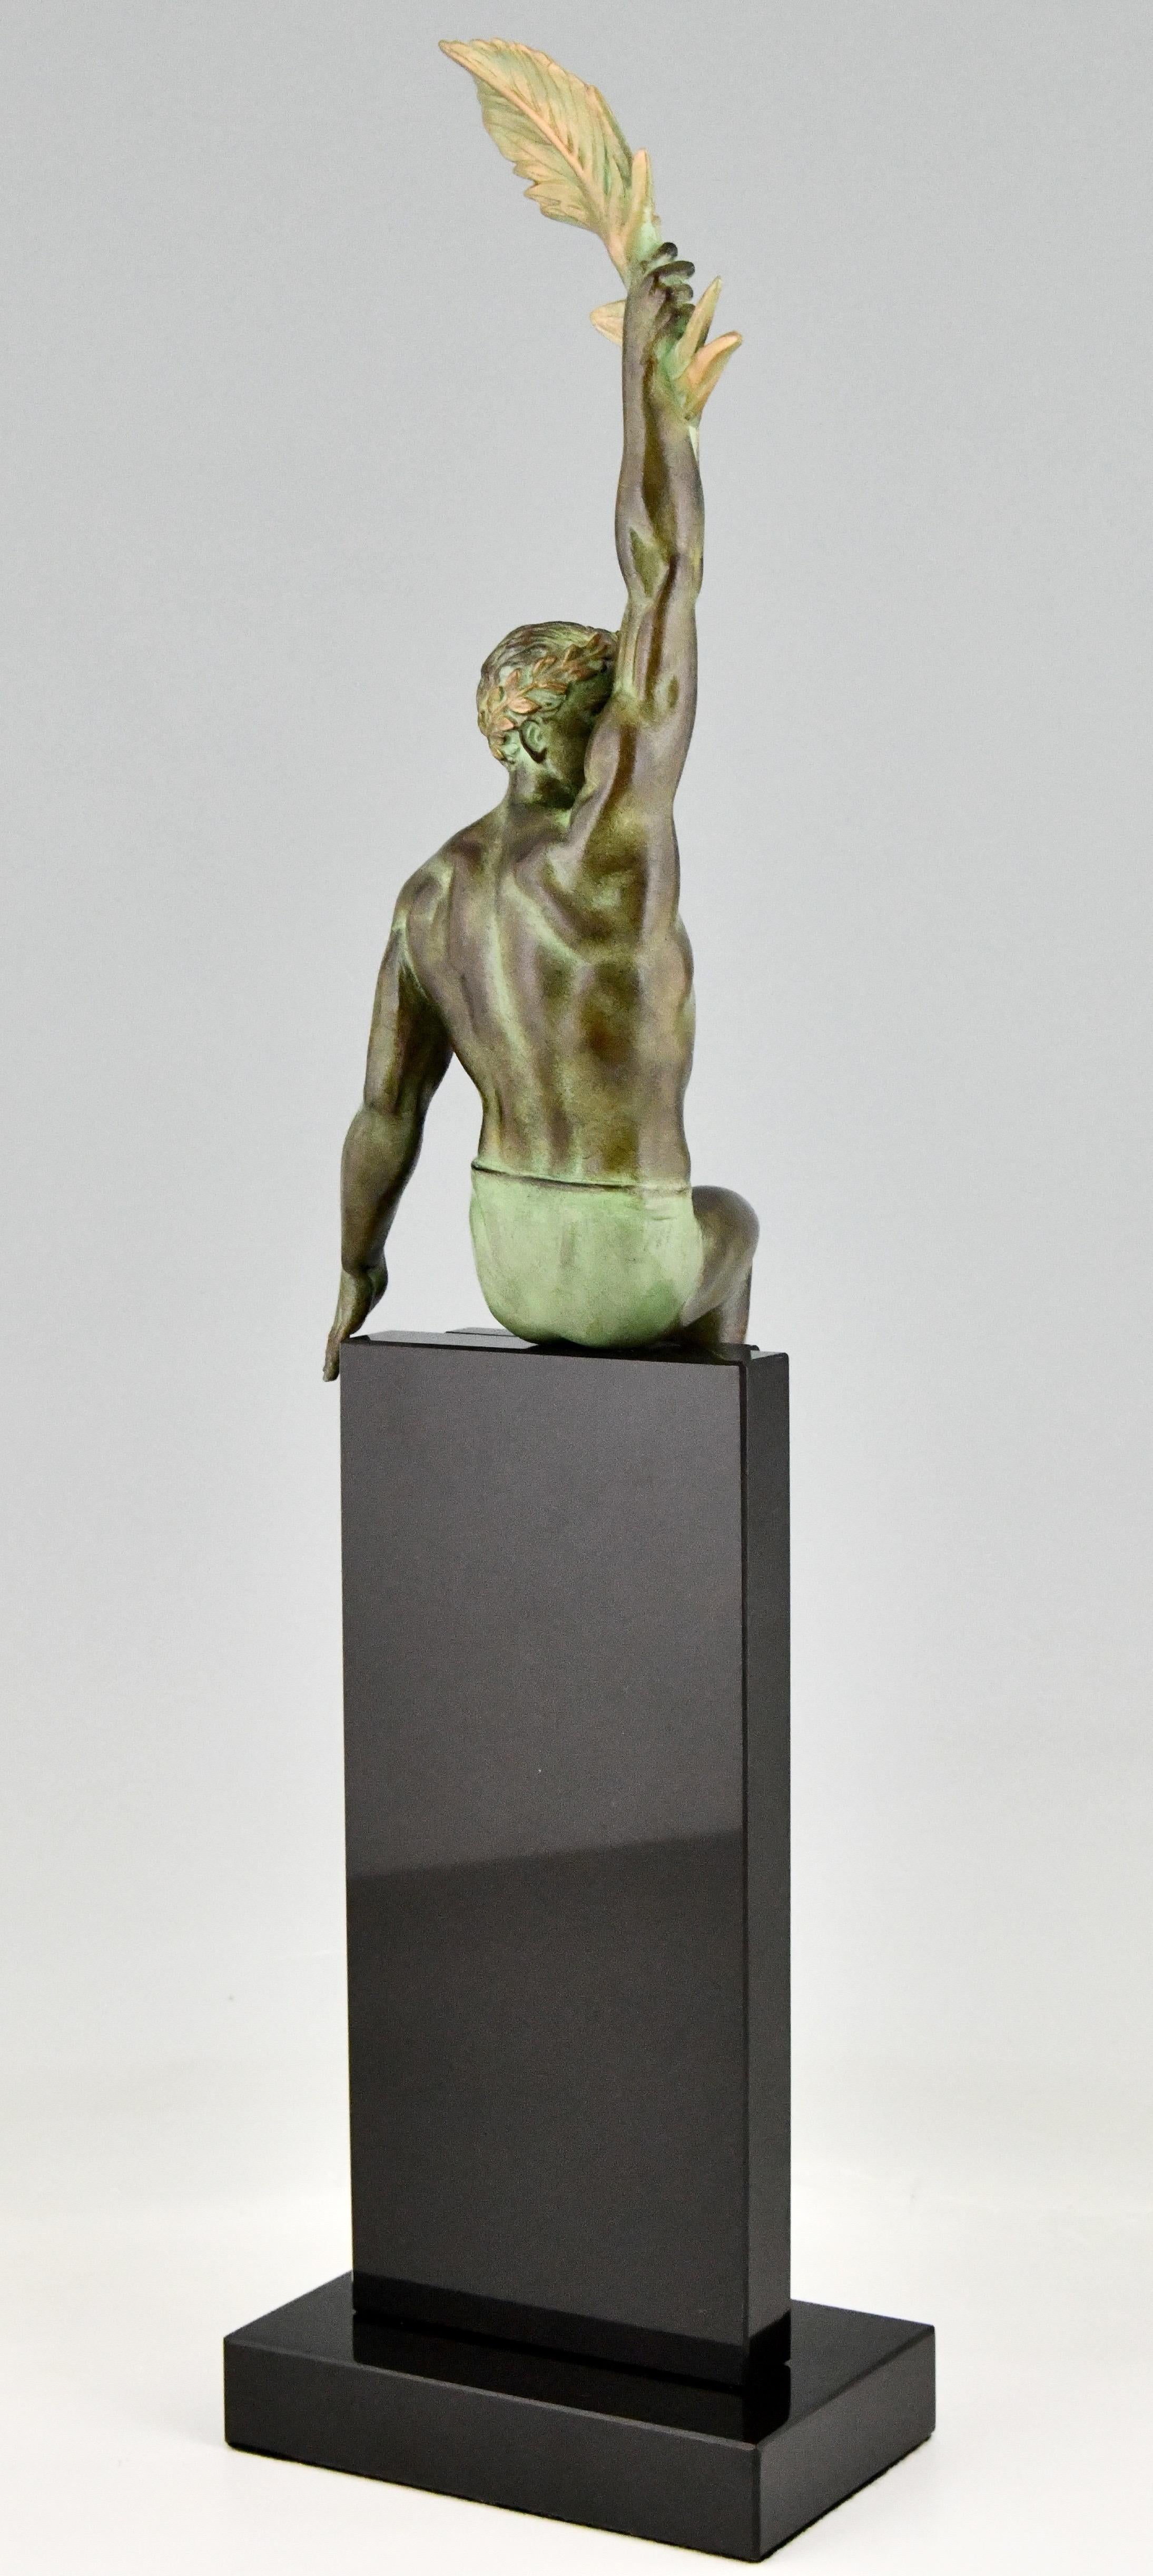 Patinated Art Deco Style Sculpture Athlete with Palm Leaf by Max Le Verrier, Victory For Sale